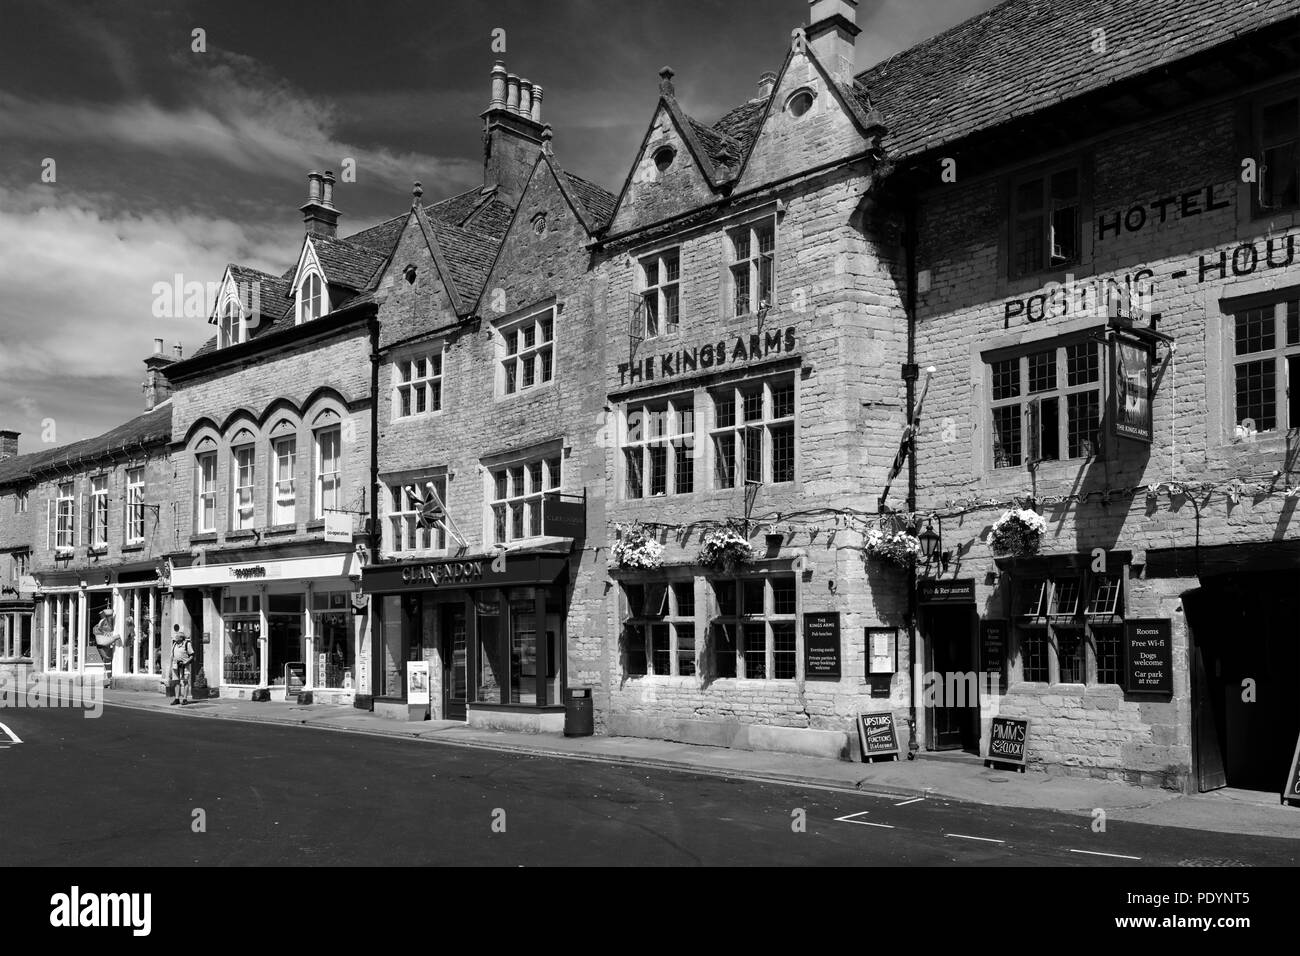 The Kings Arms Coaching Inn, Stow on the Wold Town, Gloucestershire, Cotswolds, England Stock Photo